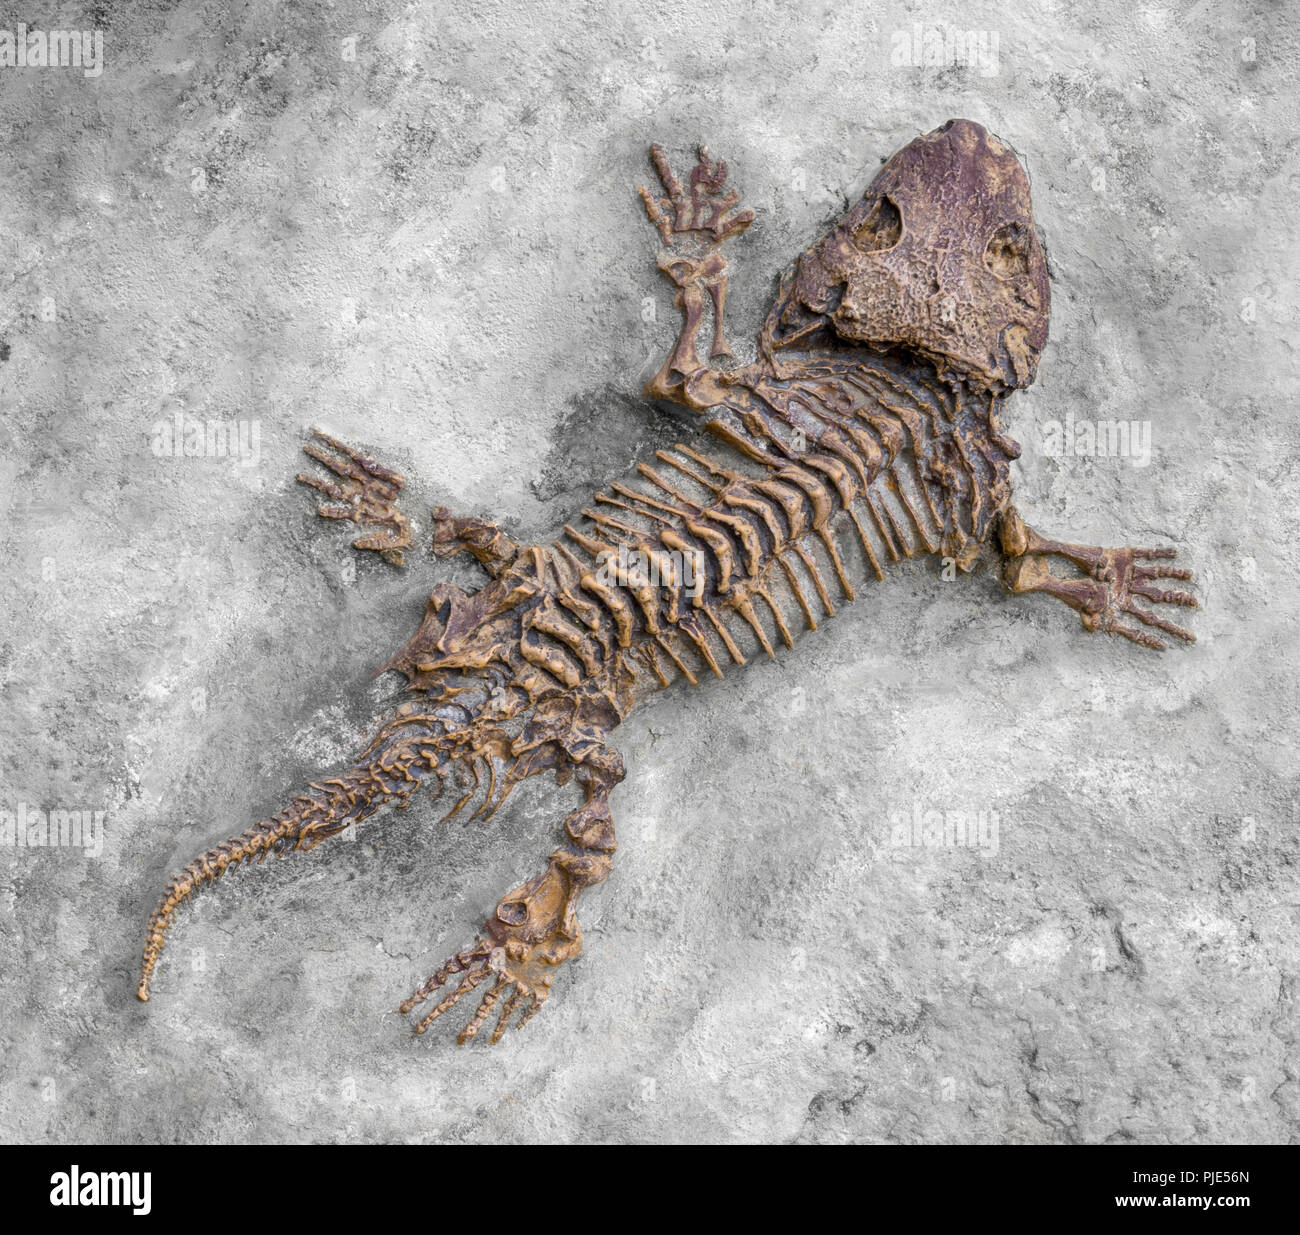 fossil closeup of a reptile-like animal named Seymouria seen from above Stock Photo